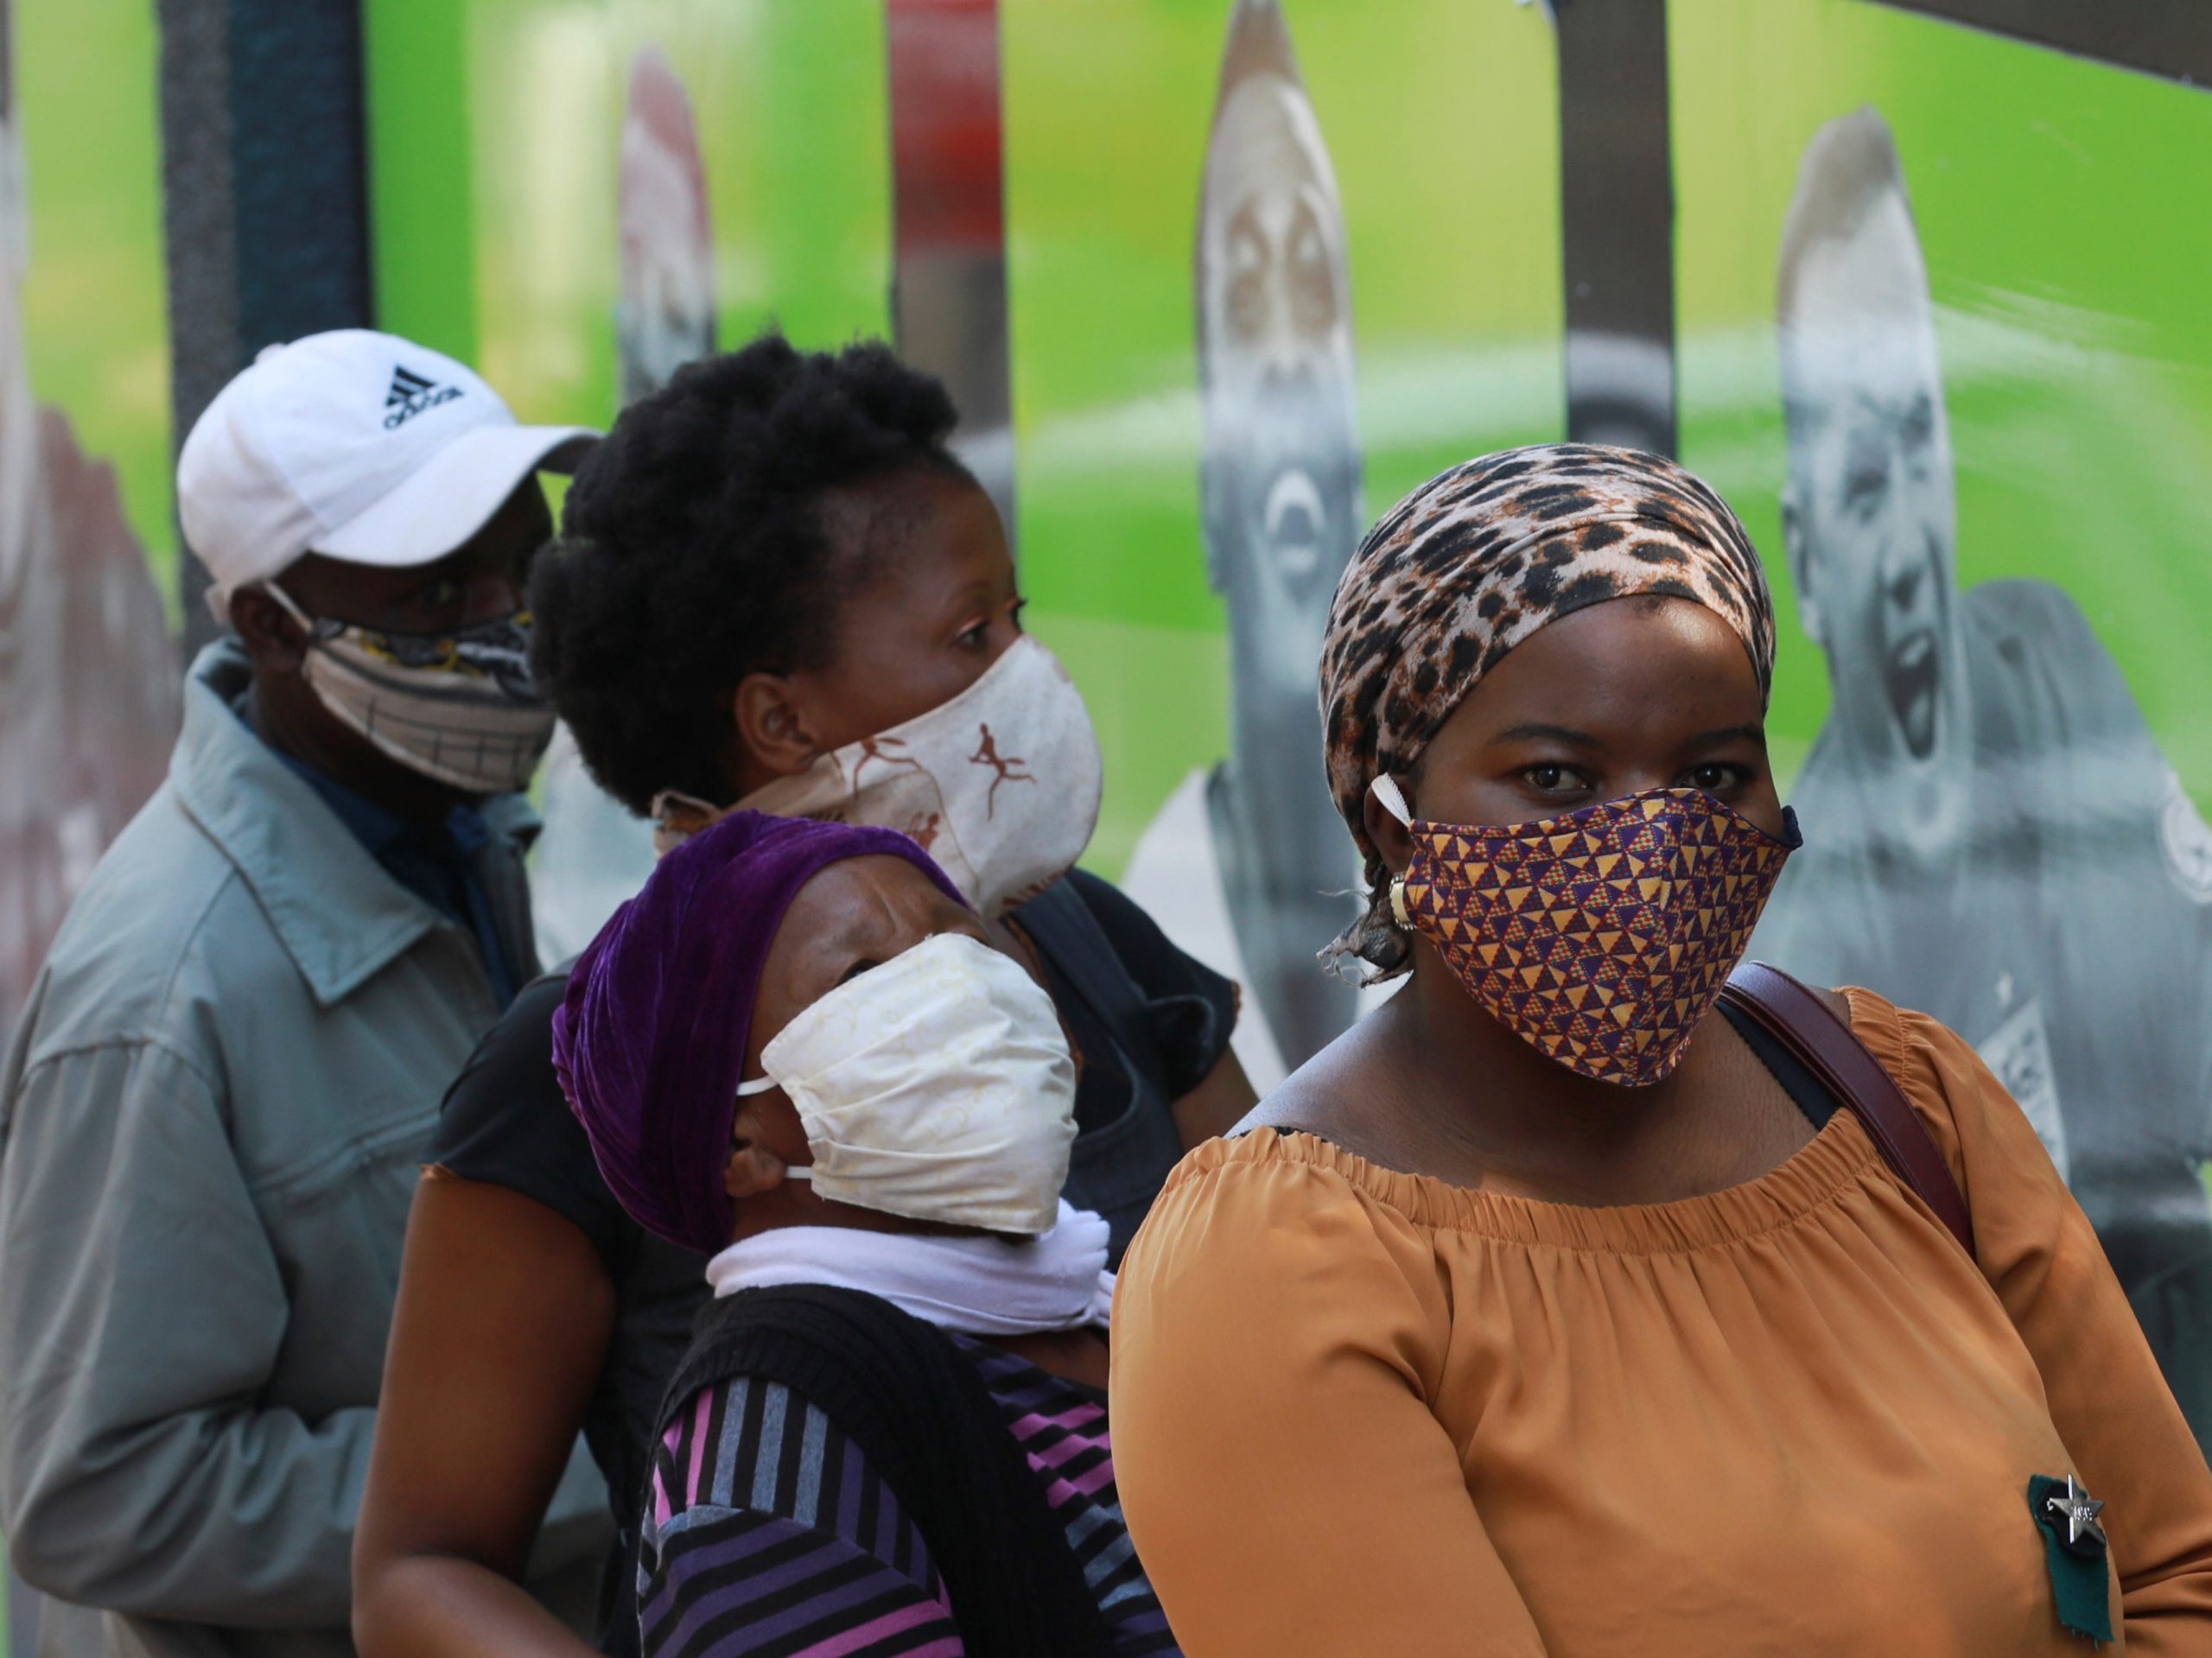 People wearing face masks queue at a South African Social Security Agency (SASSA) to collect their government grant in Cape Town South Africa, Monday, May 11, 2020. South Africa's Western Cape province, which includes the city of Cape Town, has emerged as the country's coronavirus hotspot, accounting for more than half of the nation's confirmed cases, which have gone above 10,000.(AP Photo/Nardus Engelbrecht)